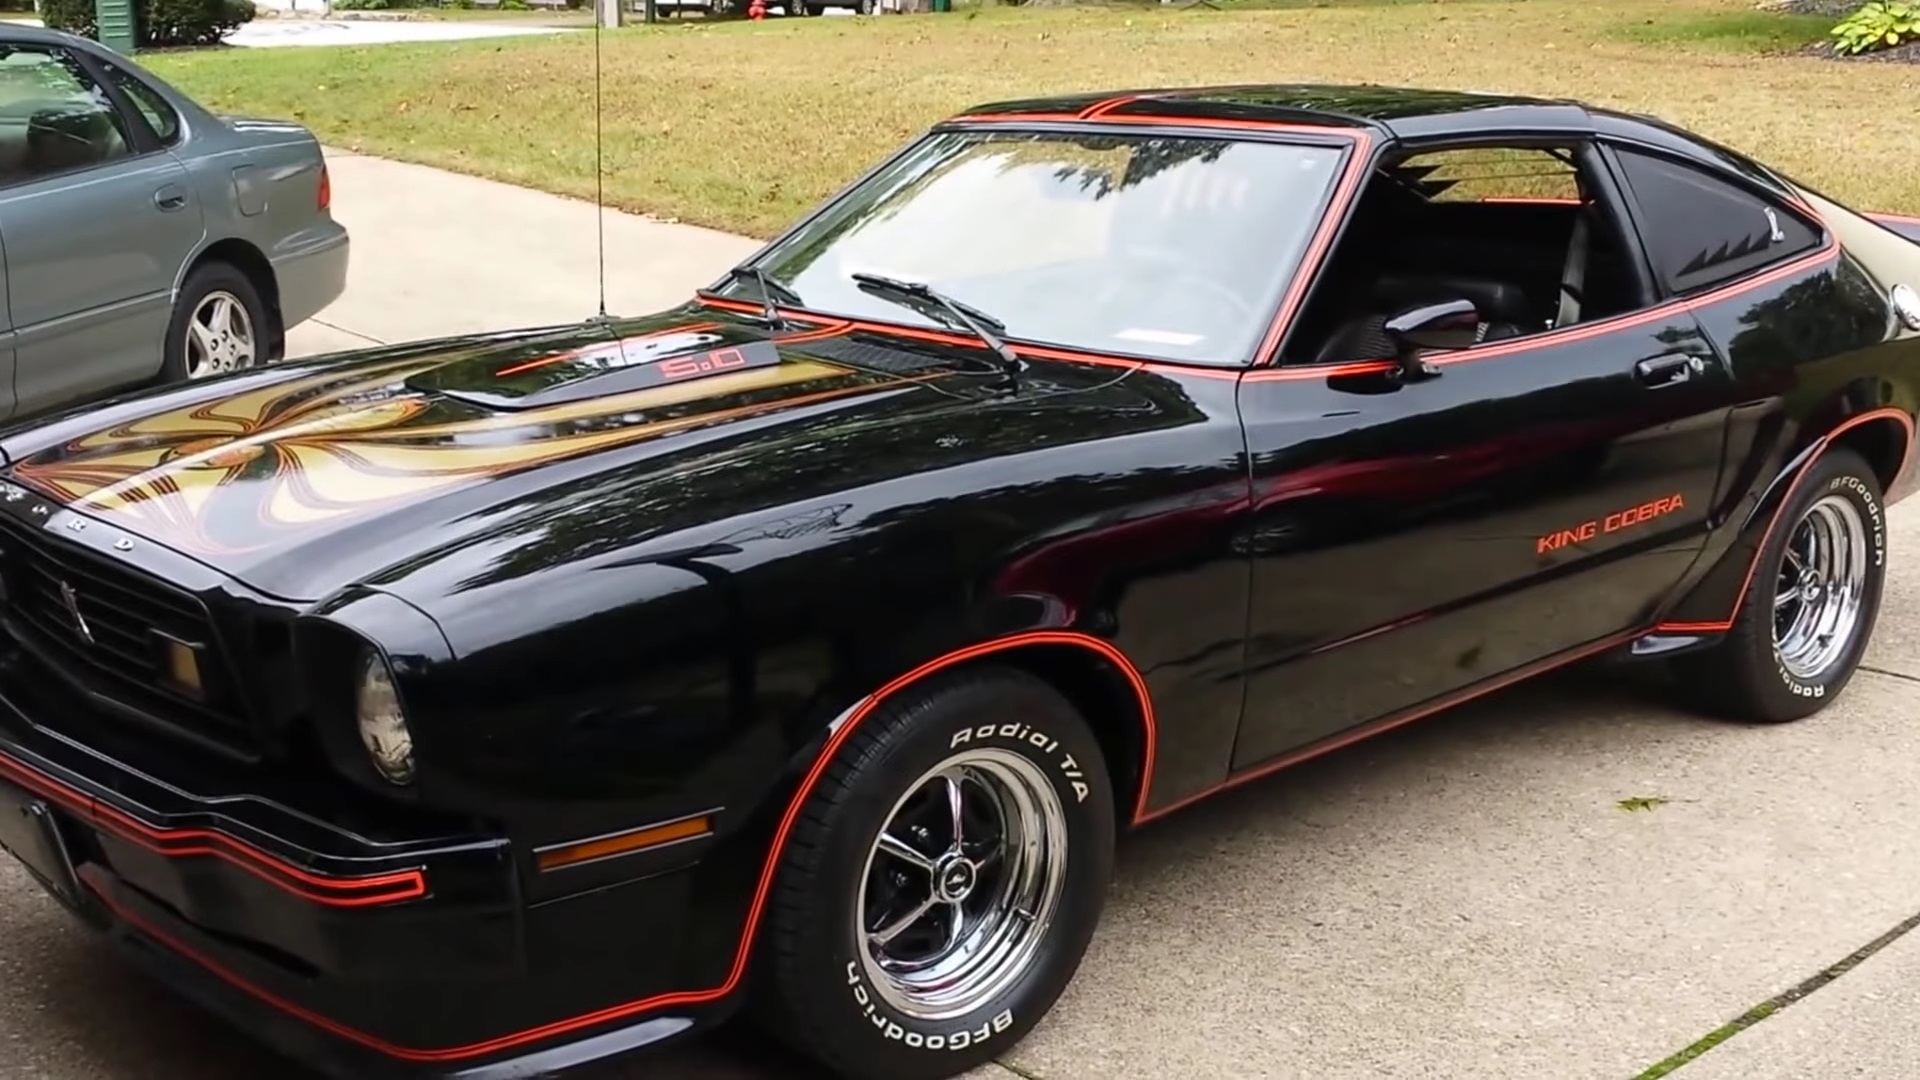 Video: 1978 Ford Mustang King Cobra Engine Startup + Quick Tour